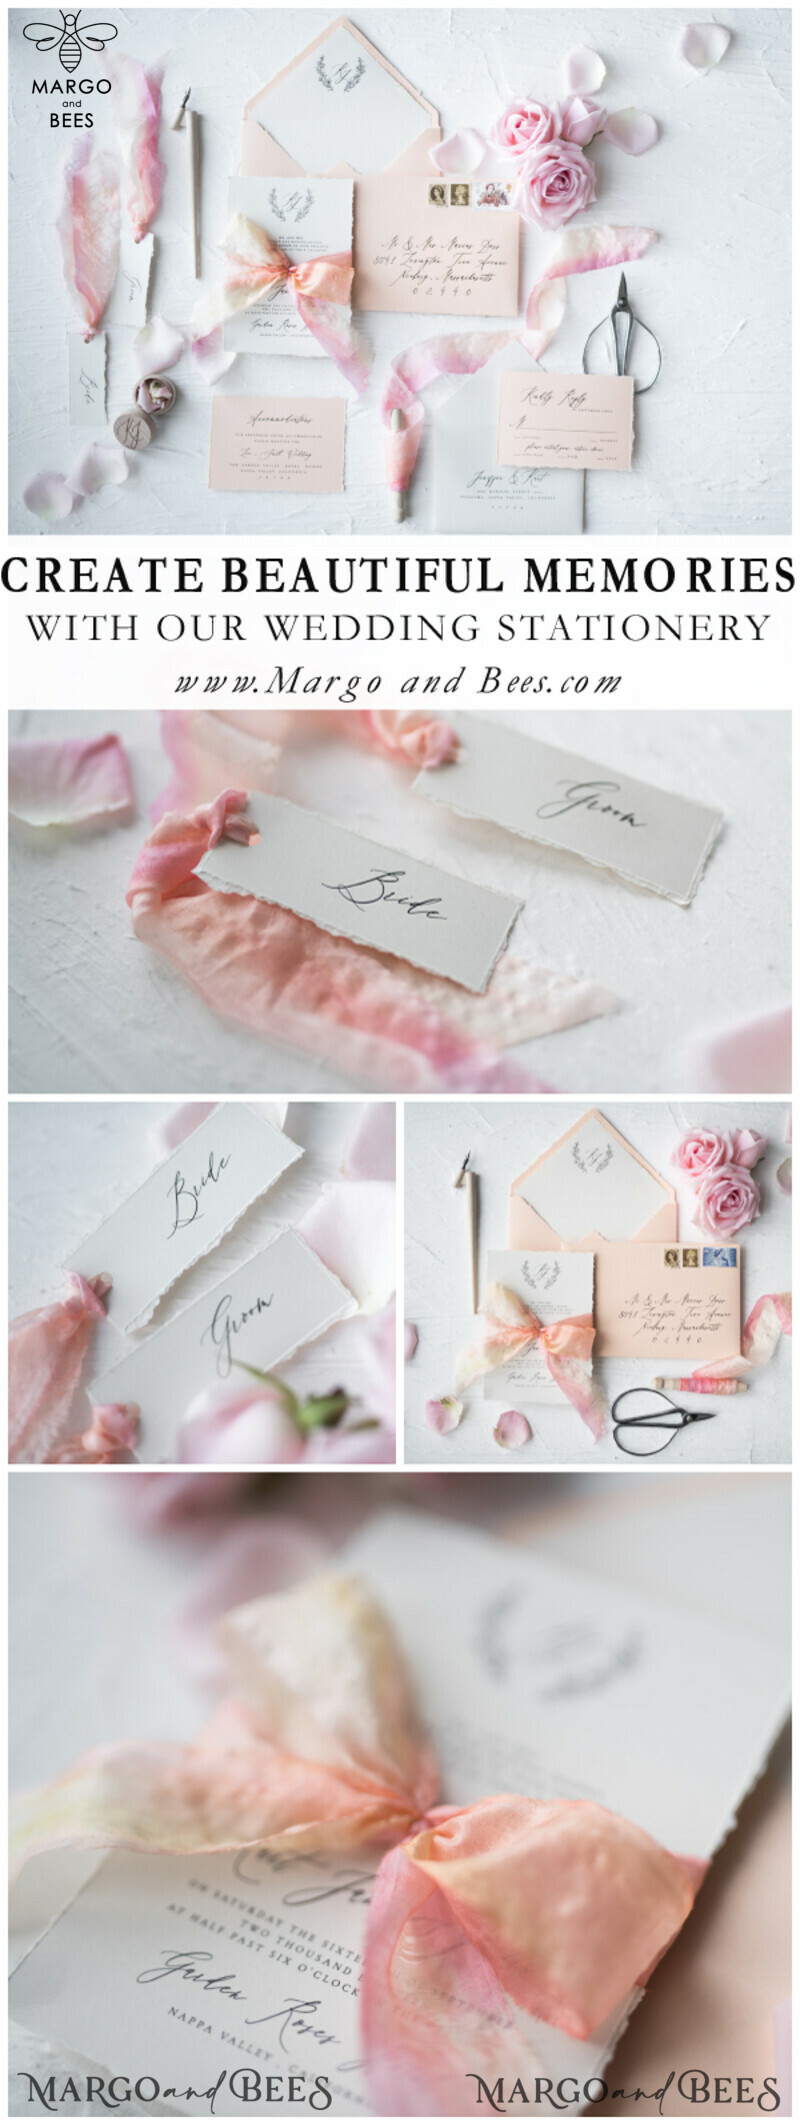 Elegant Handmade Wedding Invitation Suite: Minimalistic Peach and White, Vintage Inspired with Hand Dyed Ribbon-22